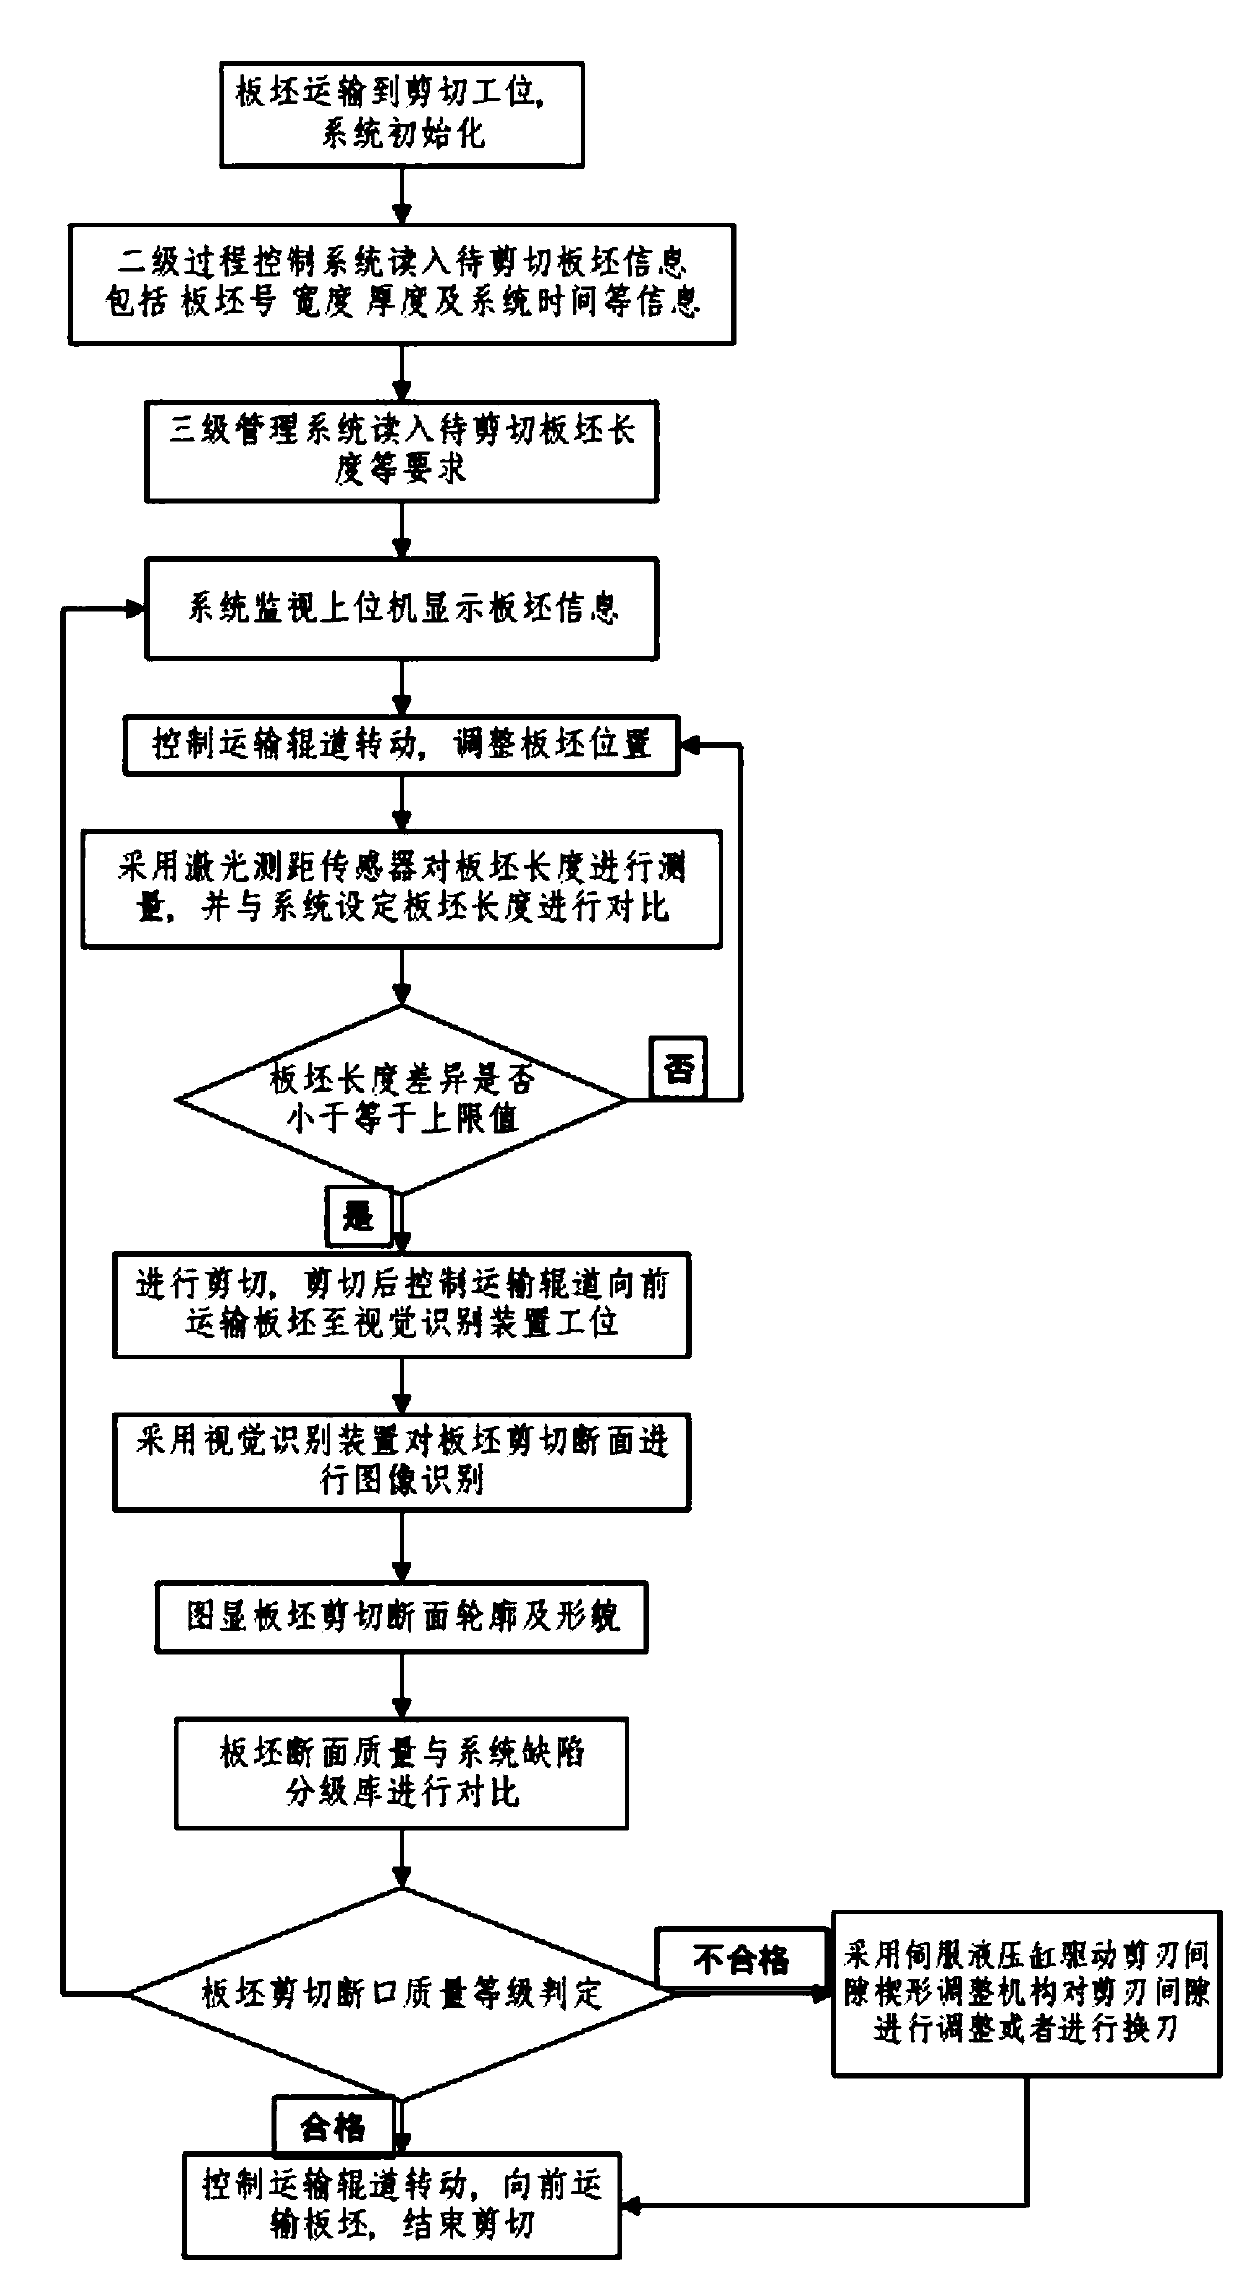 Roll-cutting shear quality monitoring system and method based on laser and visual inspection